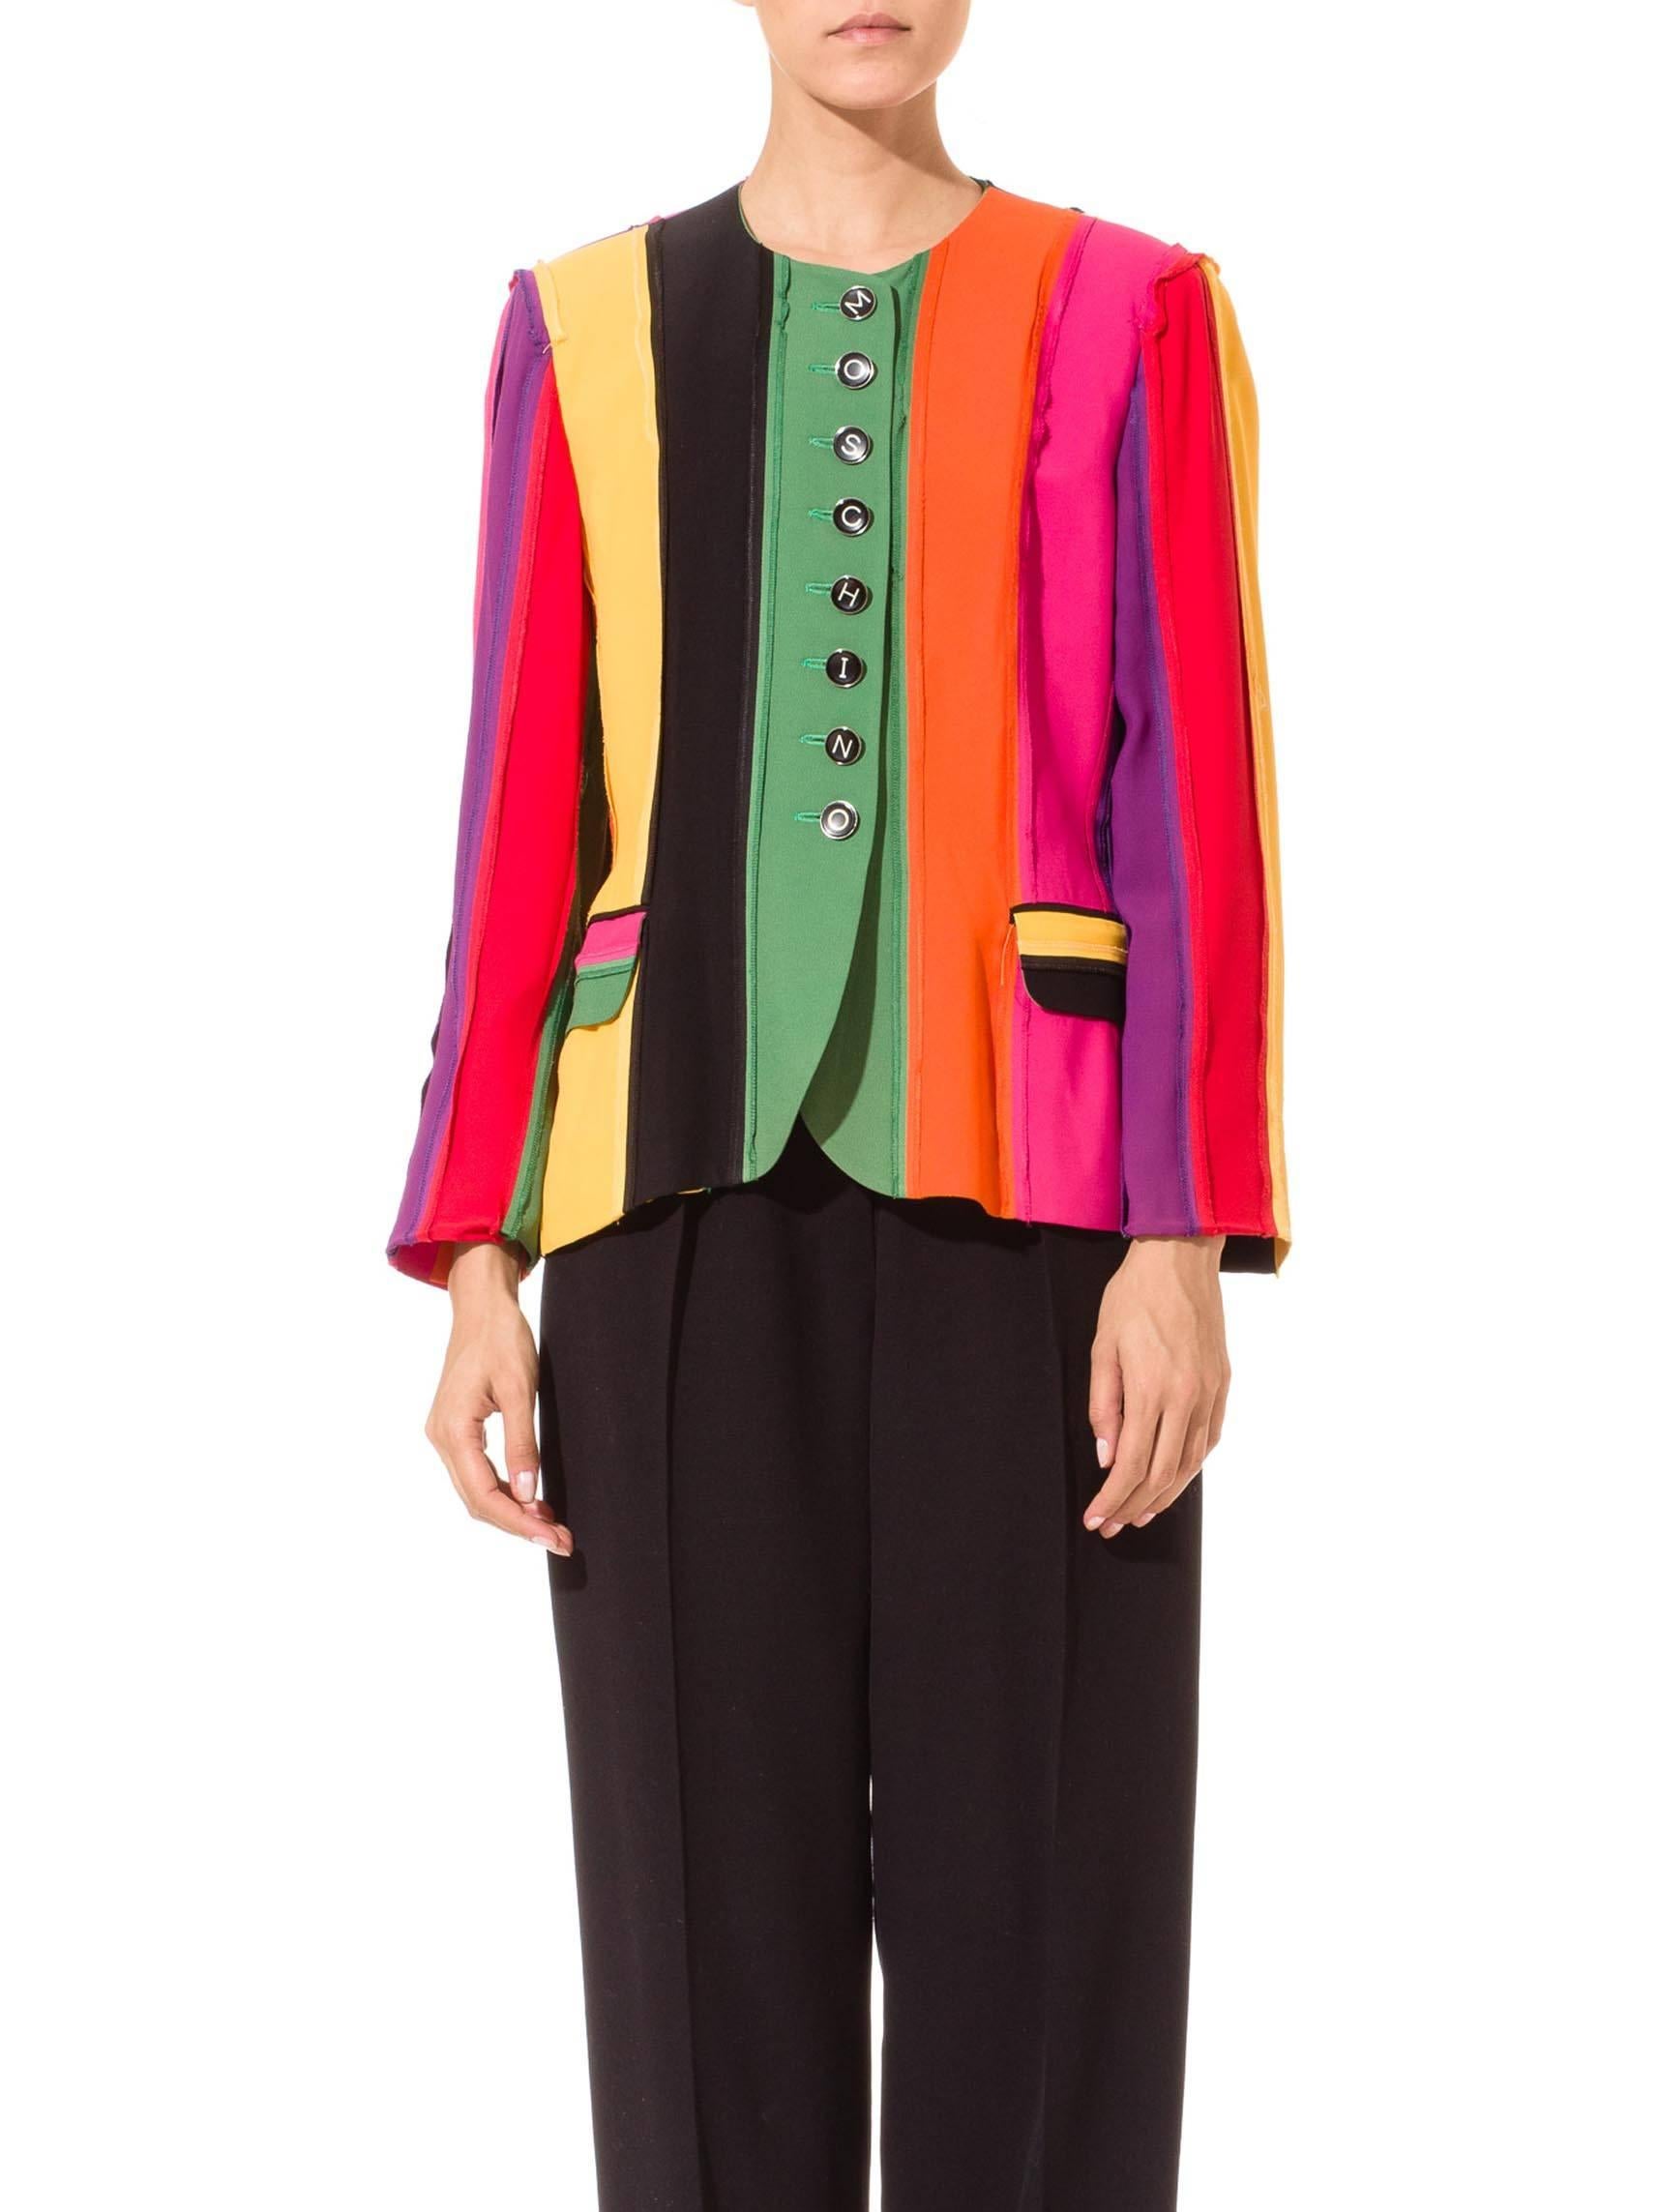 Known for his witty and provocative designs, Franco Moschino made a splash on fashion when he founded his Moschino Couture! Brand in 1983. This colorful jacket from the 90s is totally true to the brand ethos. It has black buttons in the style of old